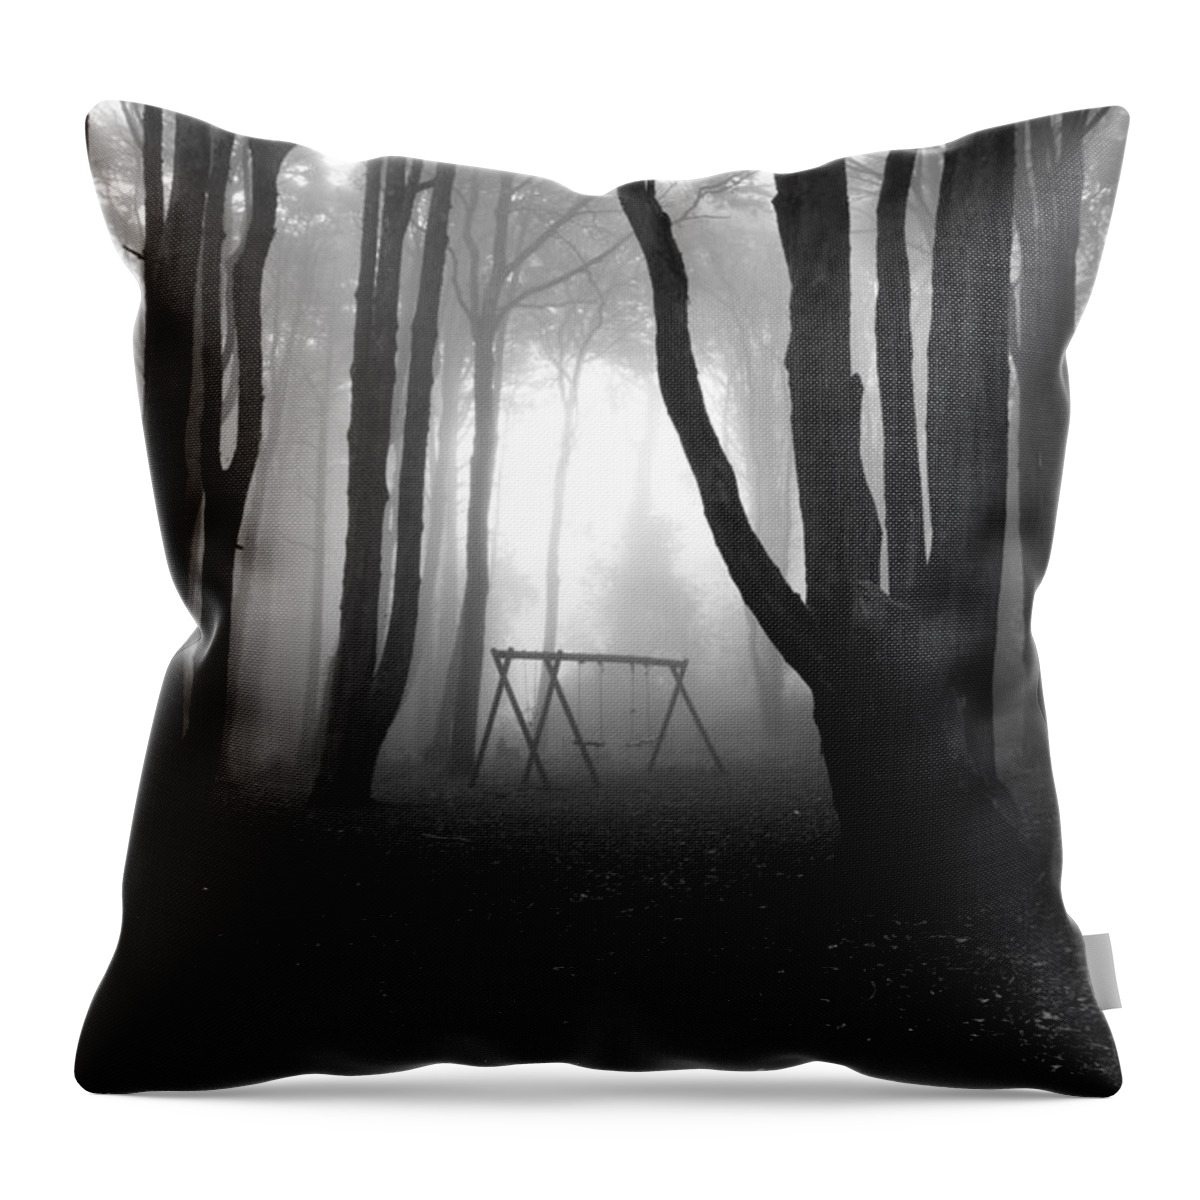 Bw Throw Pillow featuring the photograph No man's land by Jorge Maia